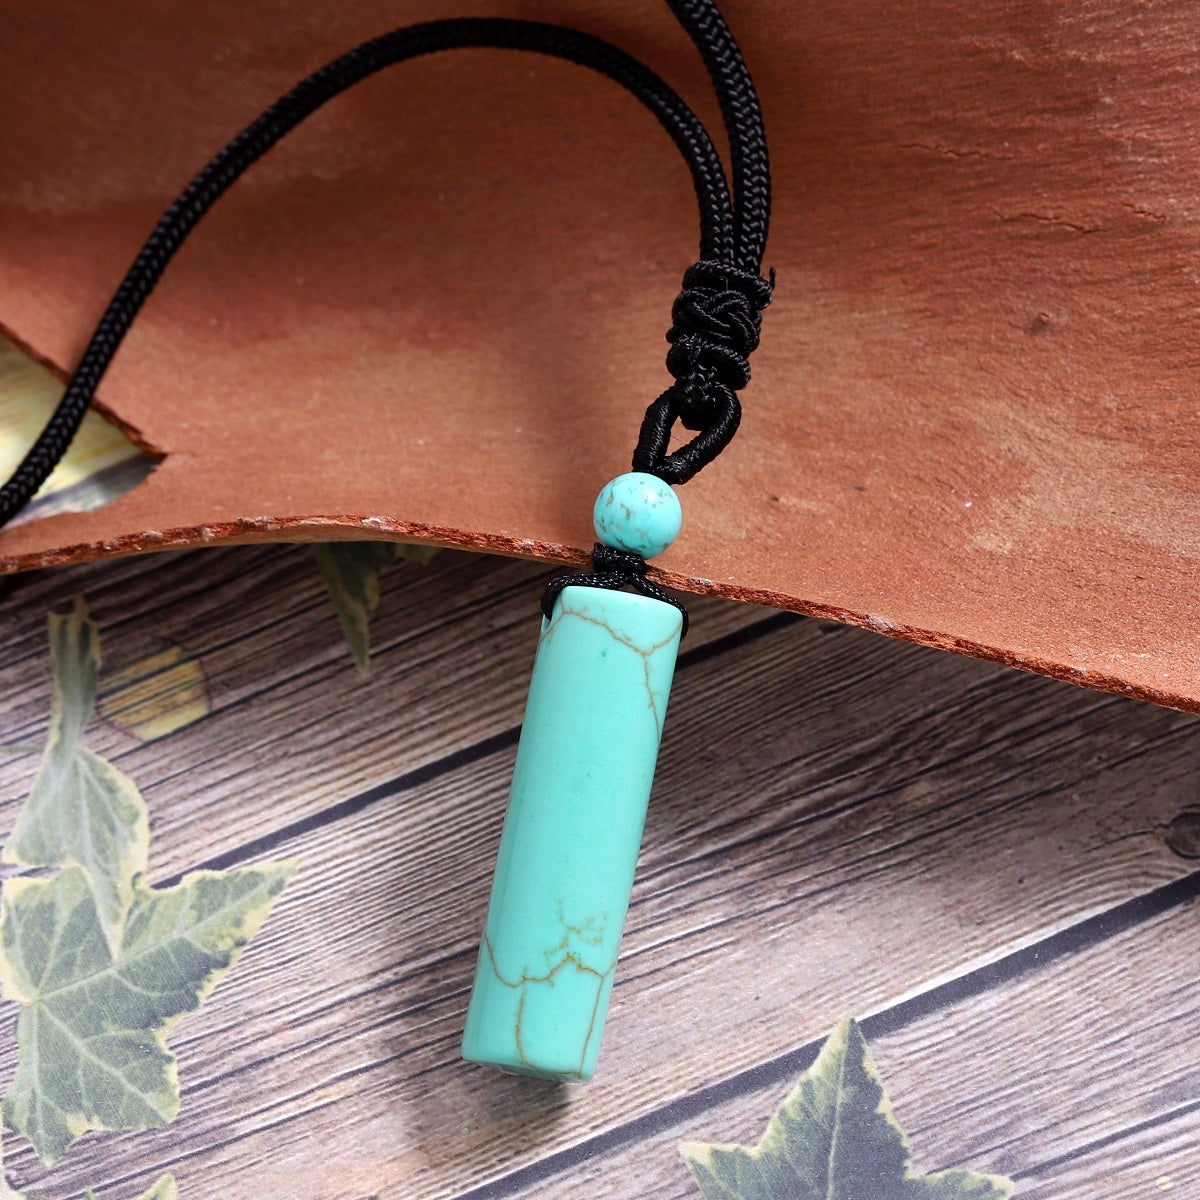 Delicate wrapped design showcasing the Turquoise gemstone pendant.